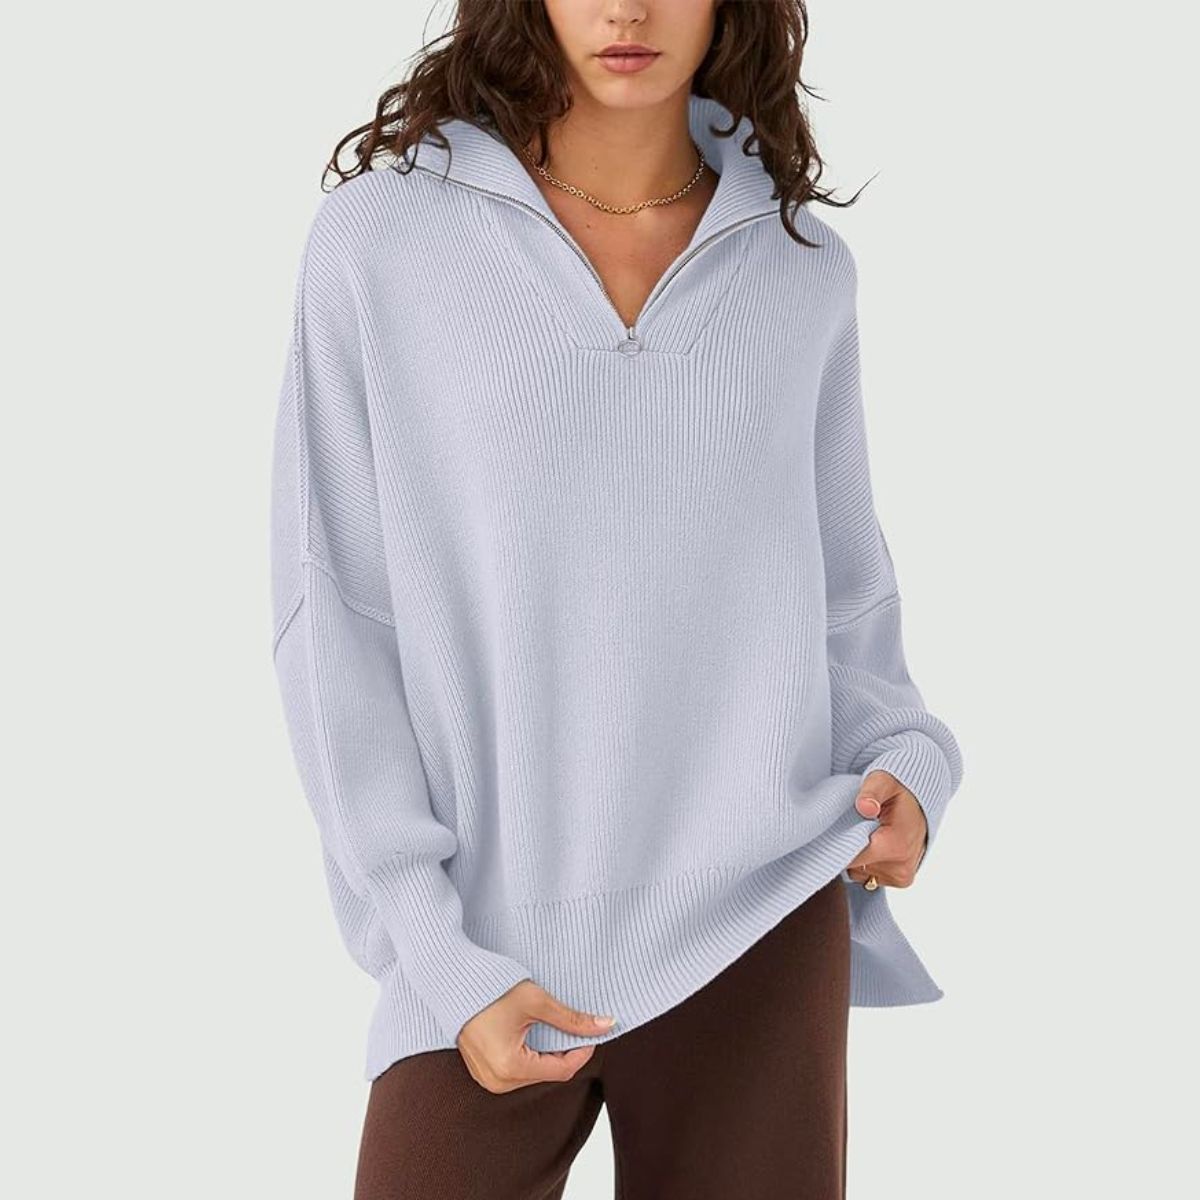 ATHMILE Womens Oversized Long Sleeve Quarter Zip Tops stock image